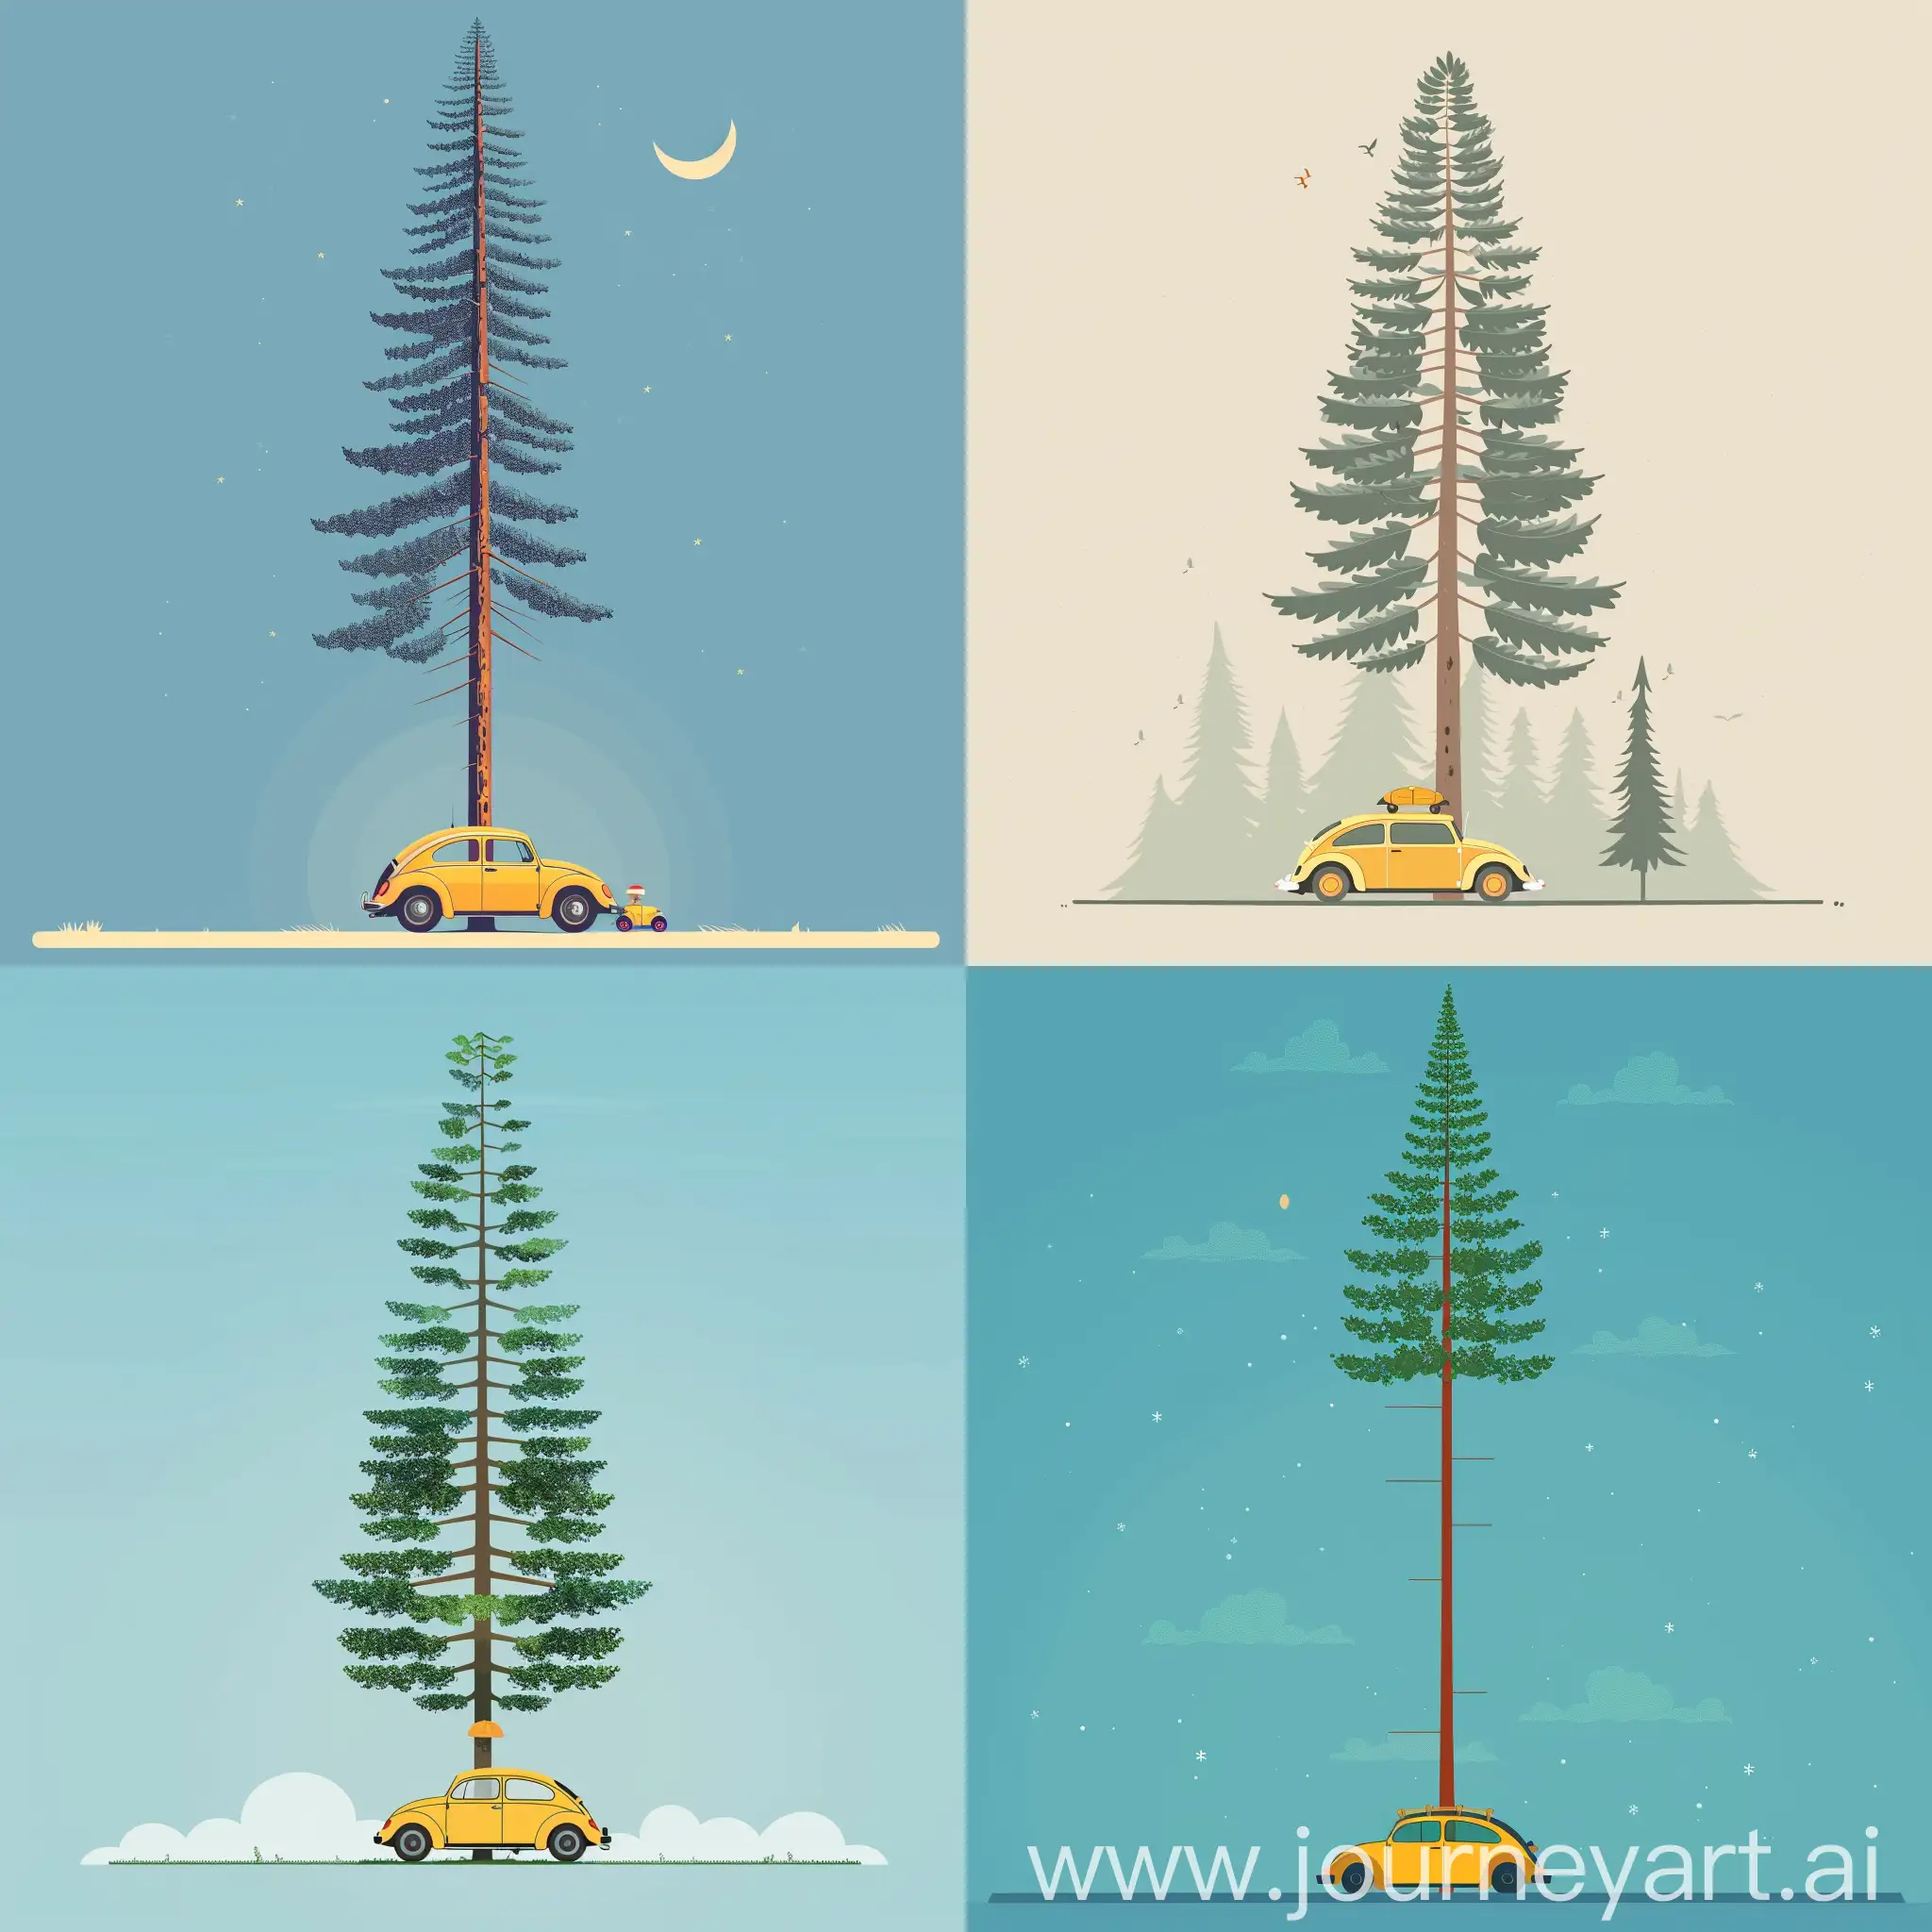  flat illustration of thin and tall tree in the middle, a yellow beetle car under the tree, summer time, Hayao Miyazaki style, high quality details